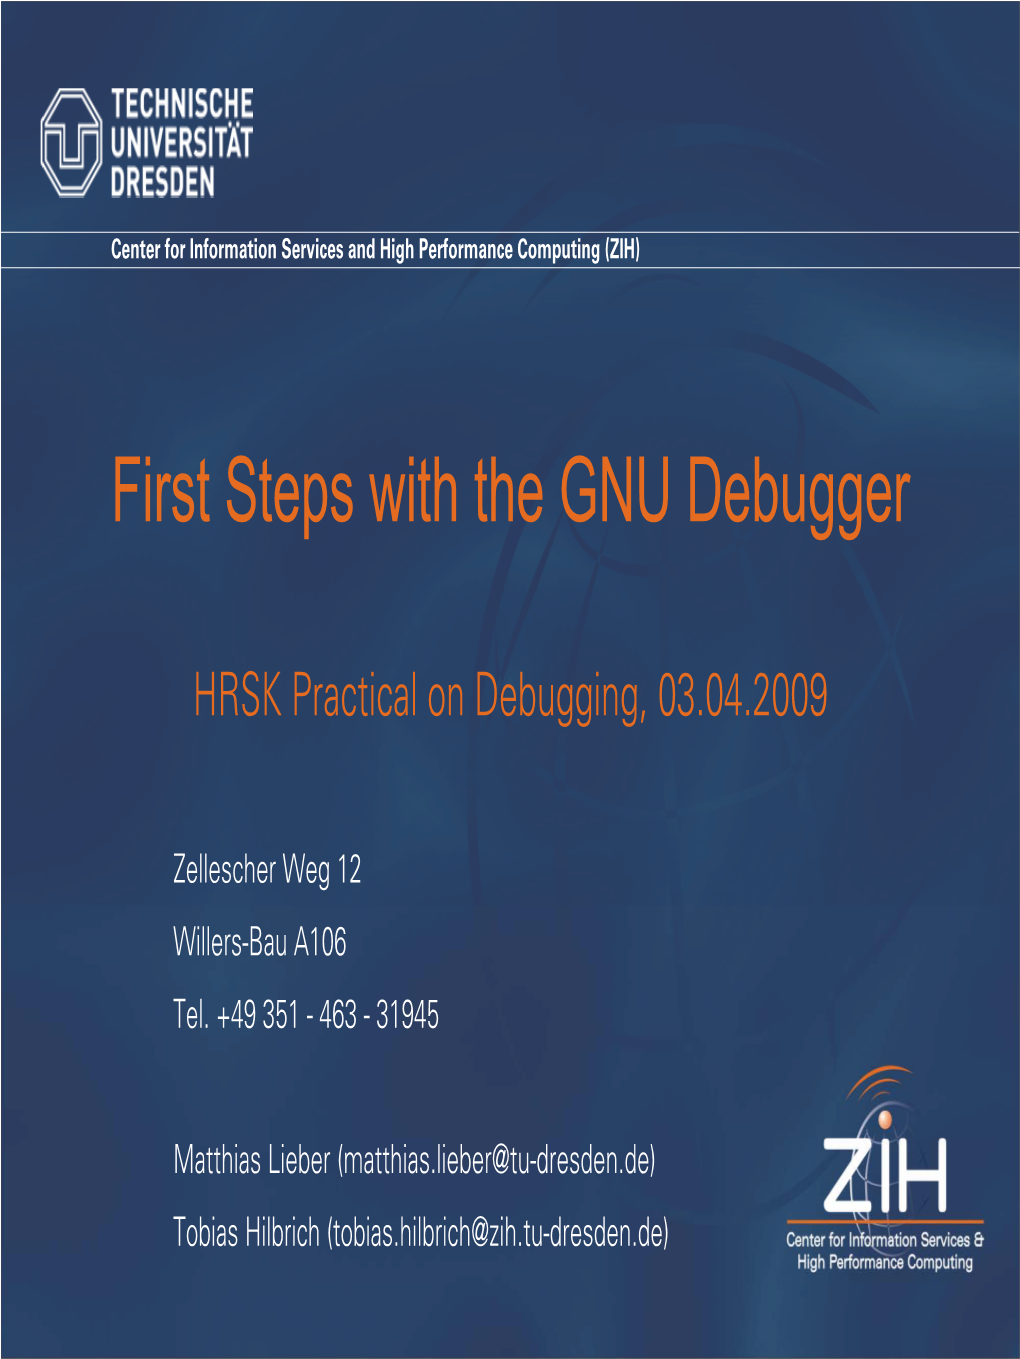 First Steps with the GNU Debugger